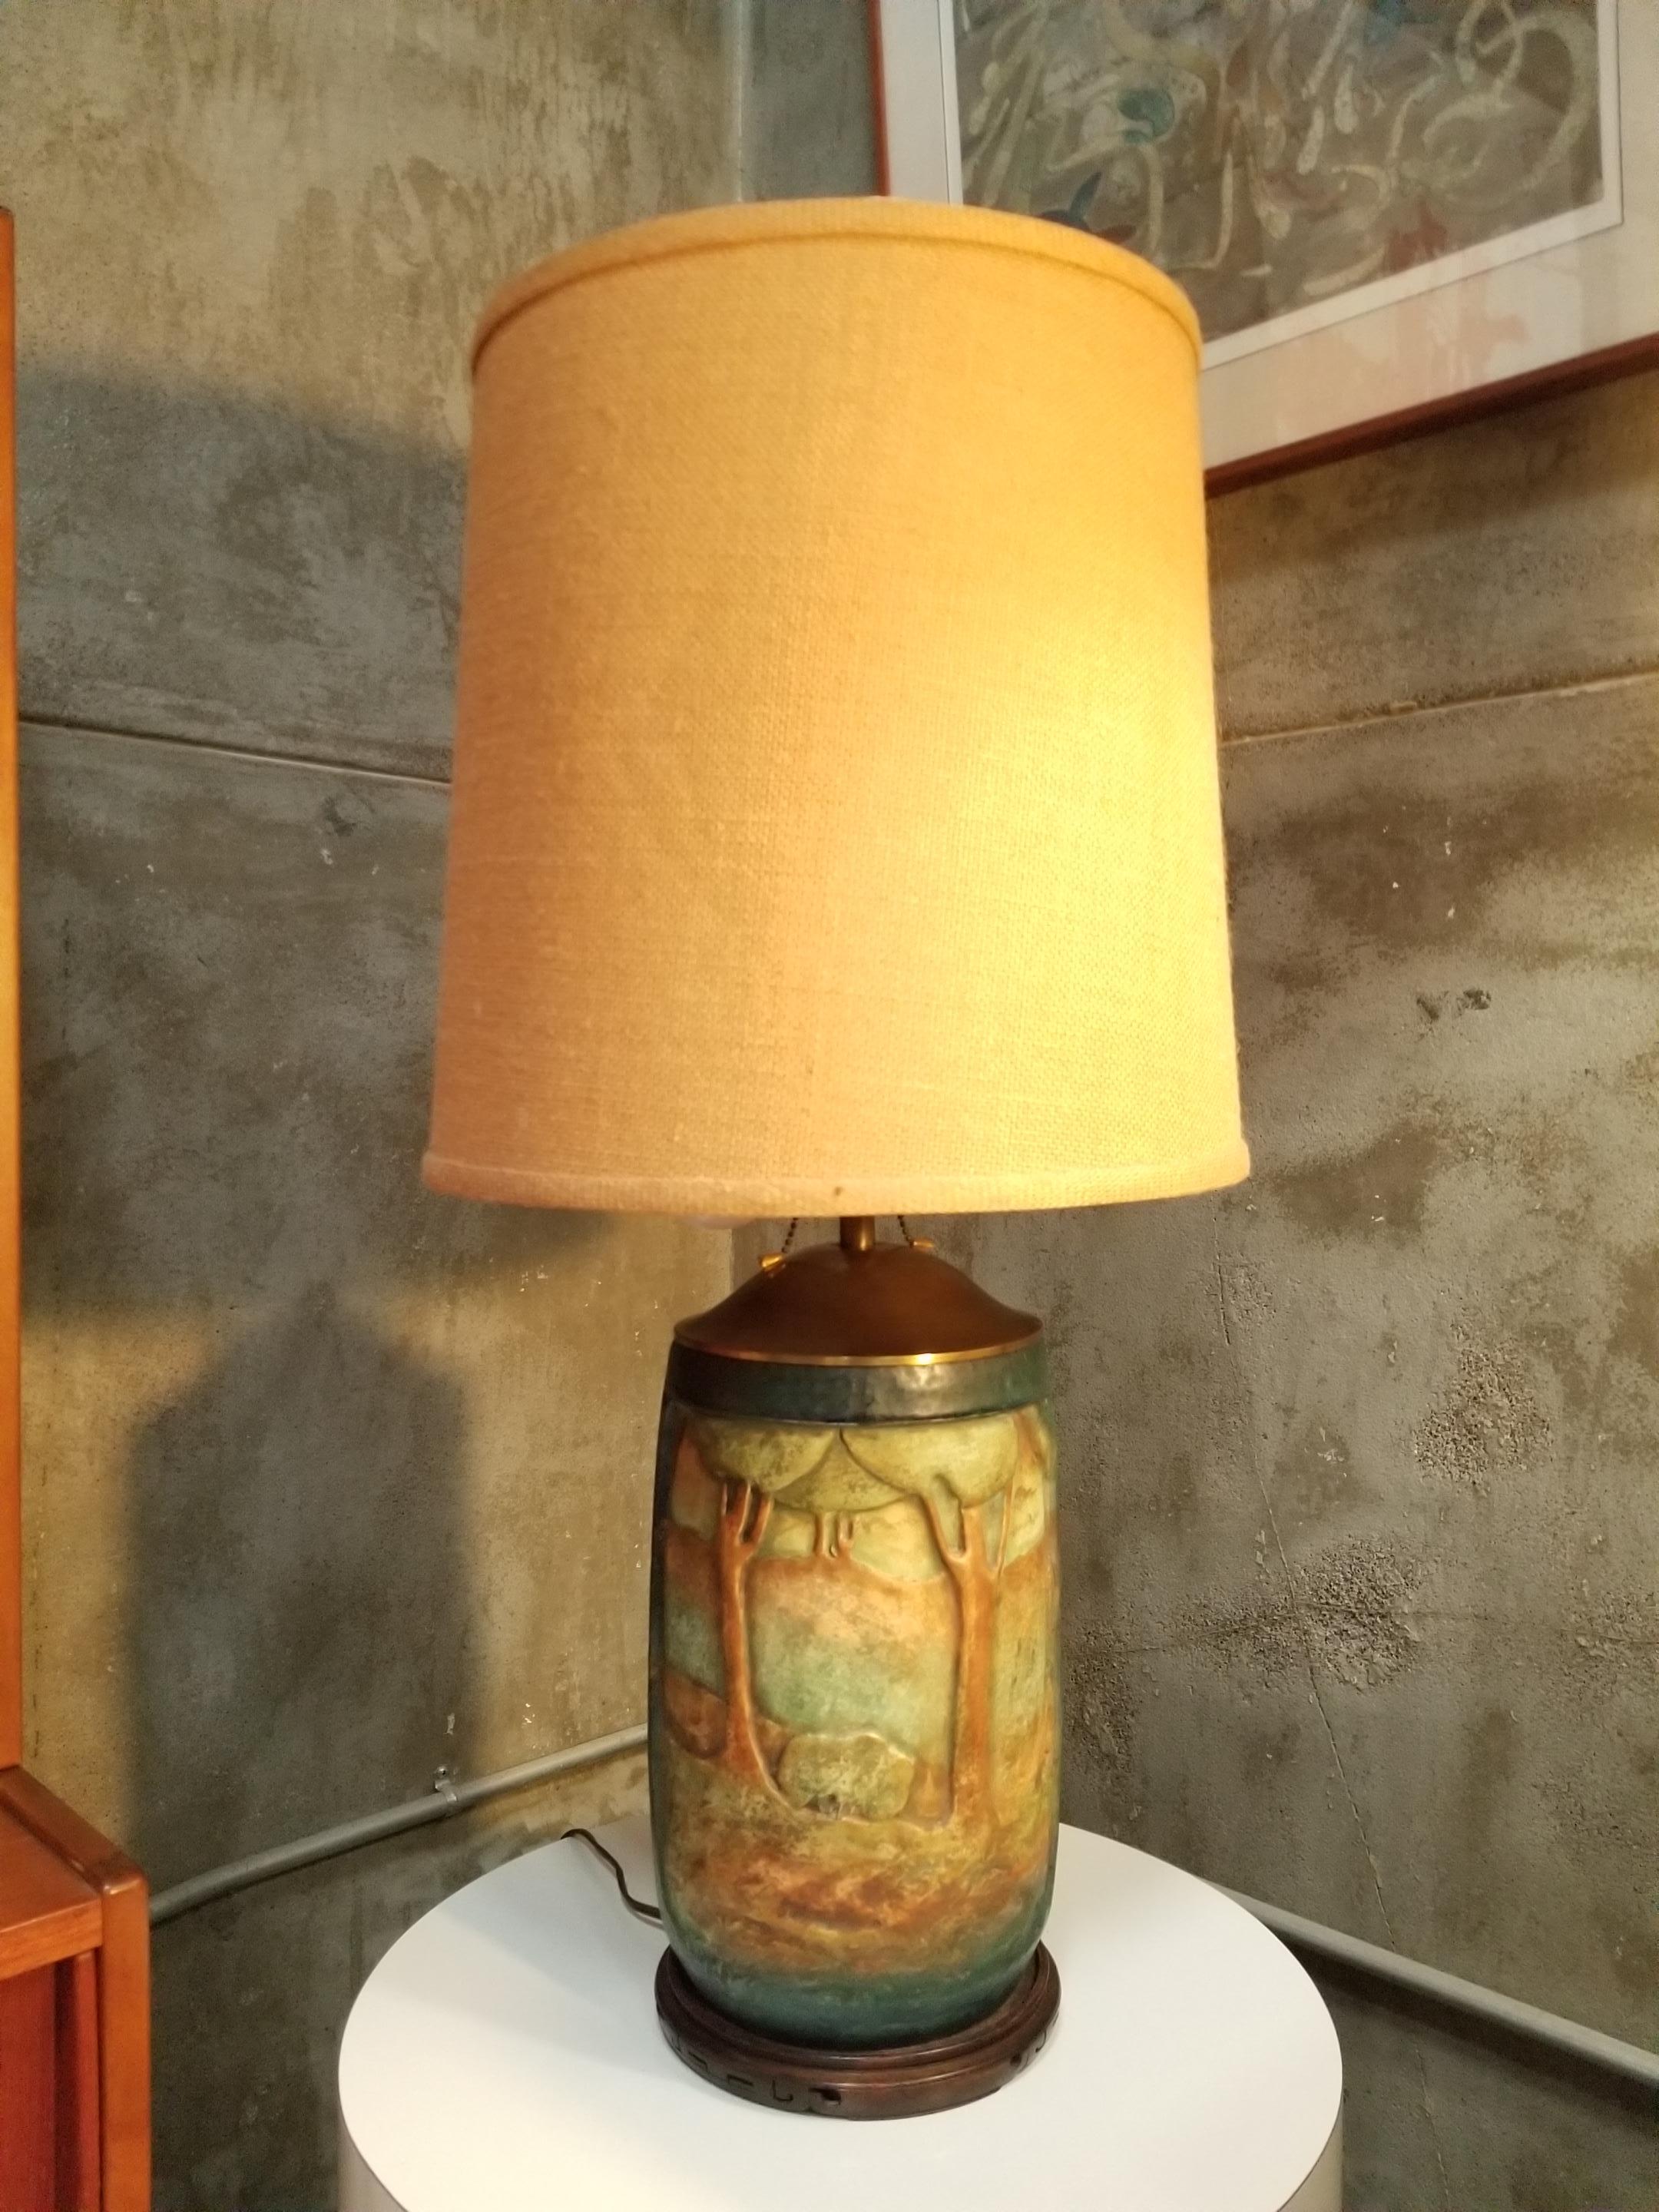 Early 20th century Arts & Crafts era ceramic poly-chrome table lamp by Amphora. Two sided decoration depicting The Harvest on one side and a forest scene verso. Matt glaze with soft, organic color palette. Ceramic base only stands 12